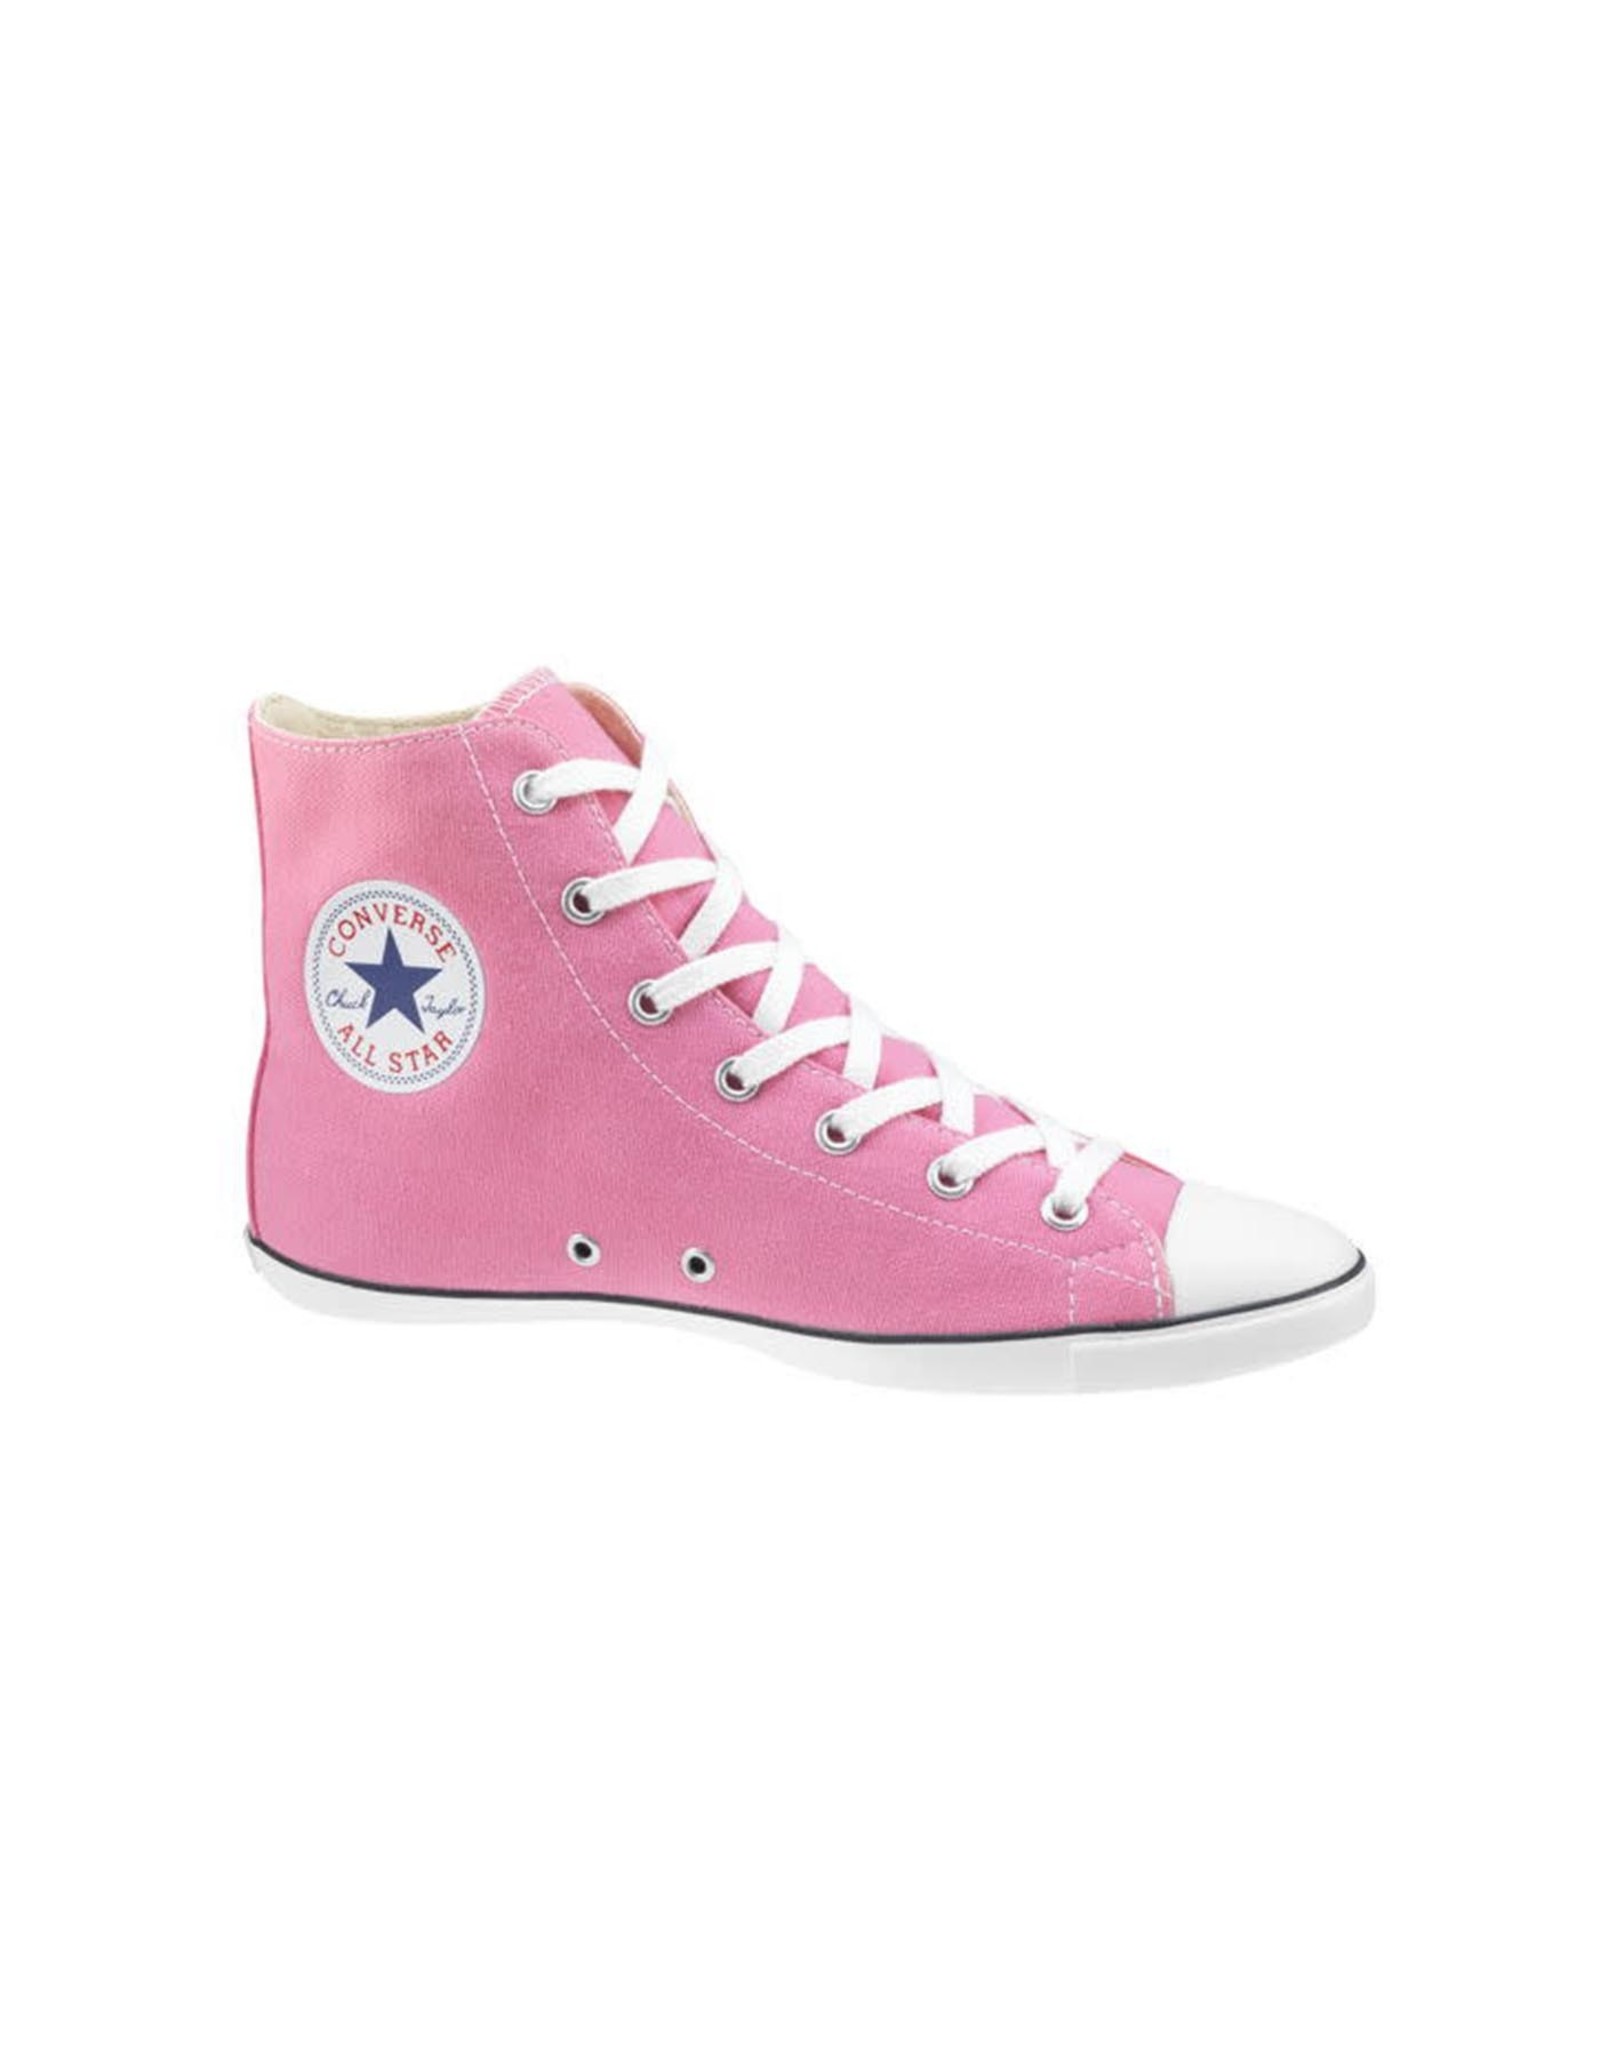 pink and white converse all star